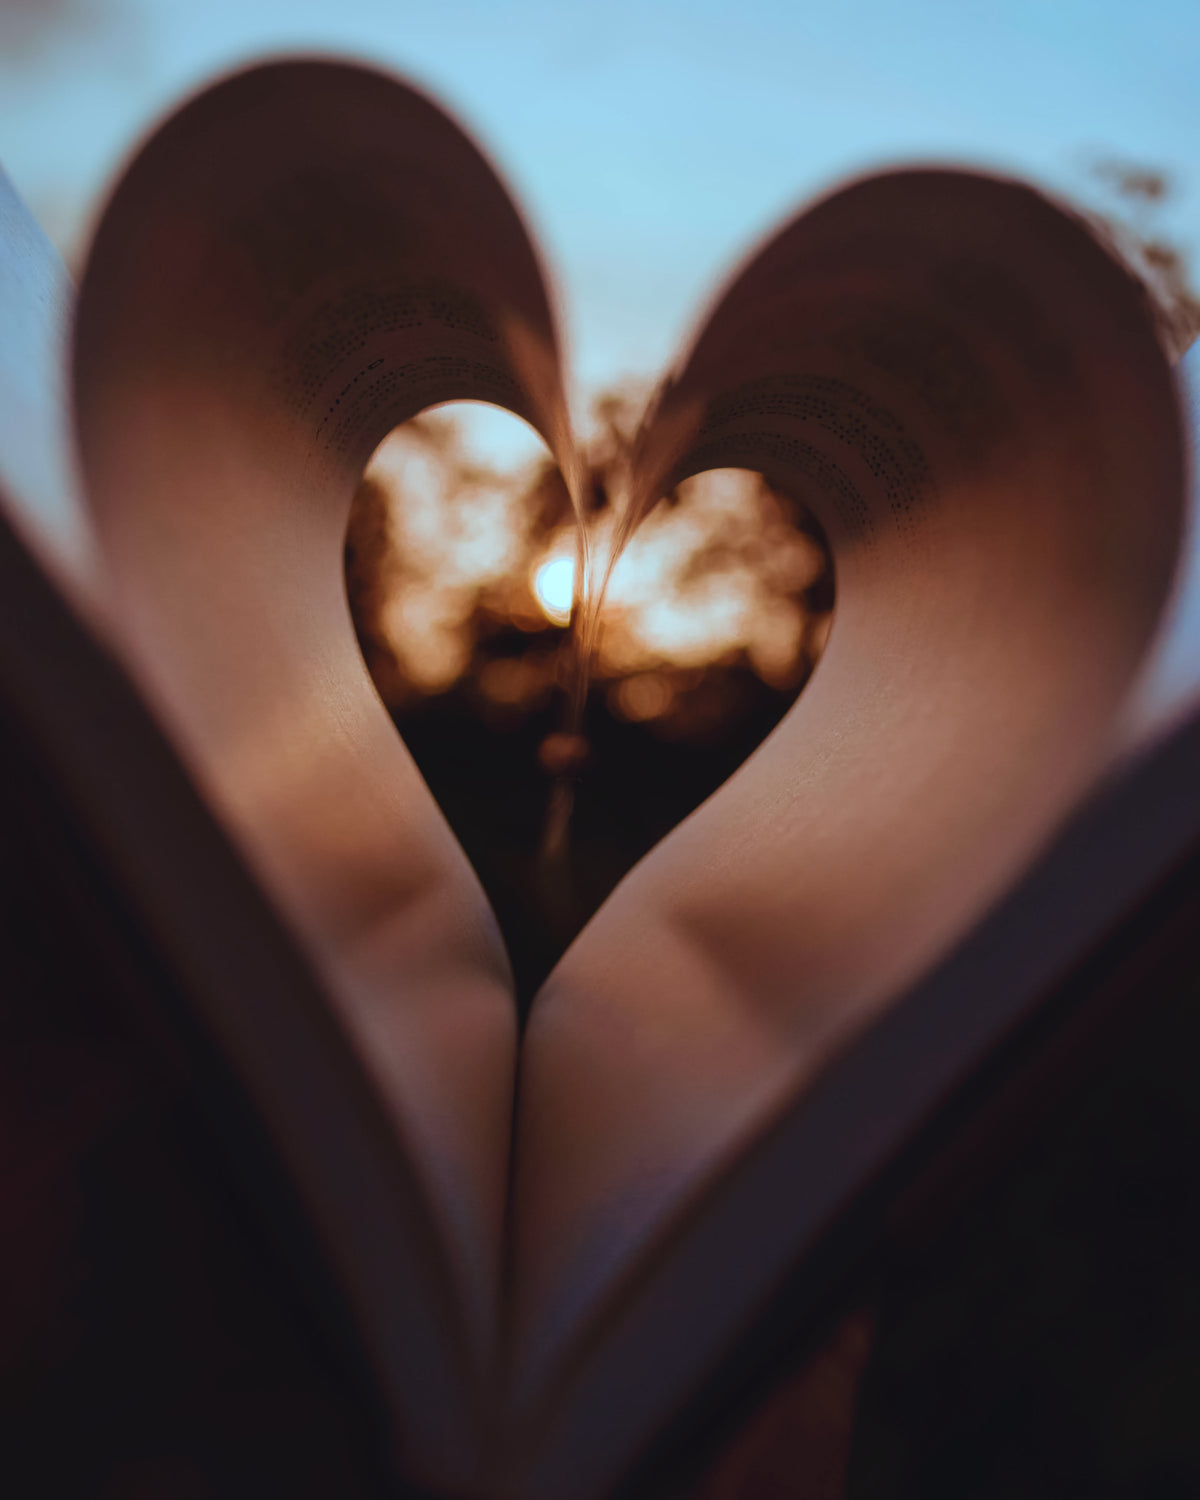 pages of a book curled inwards to create a heart